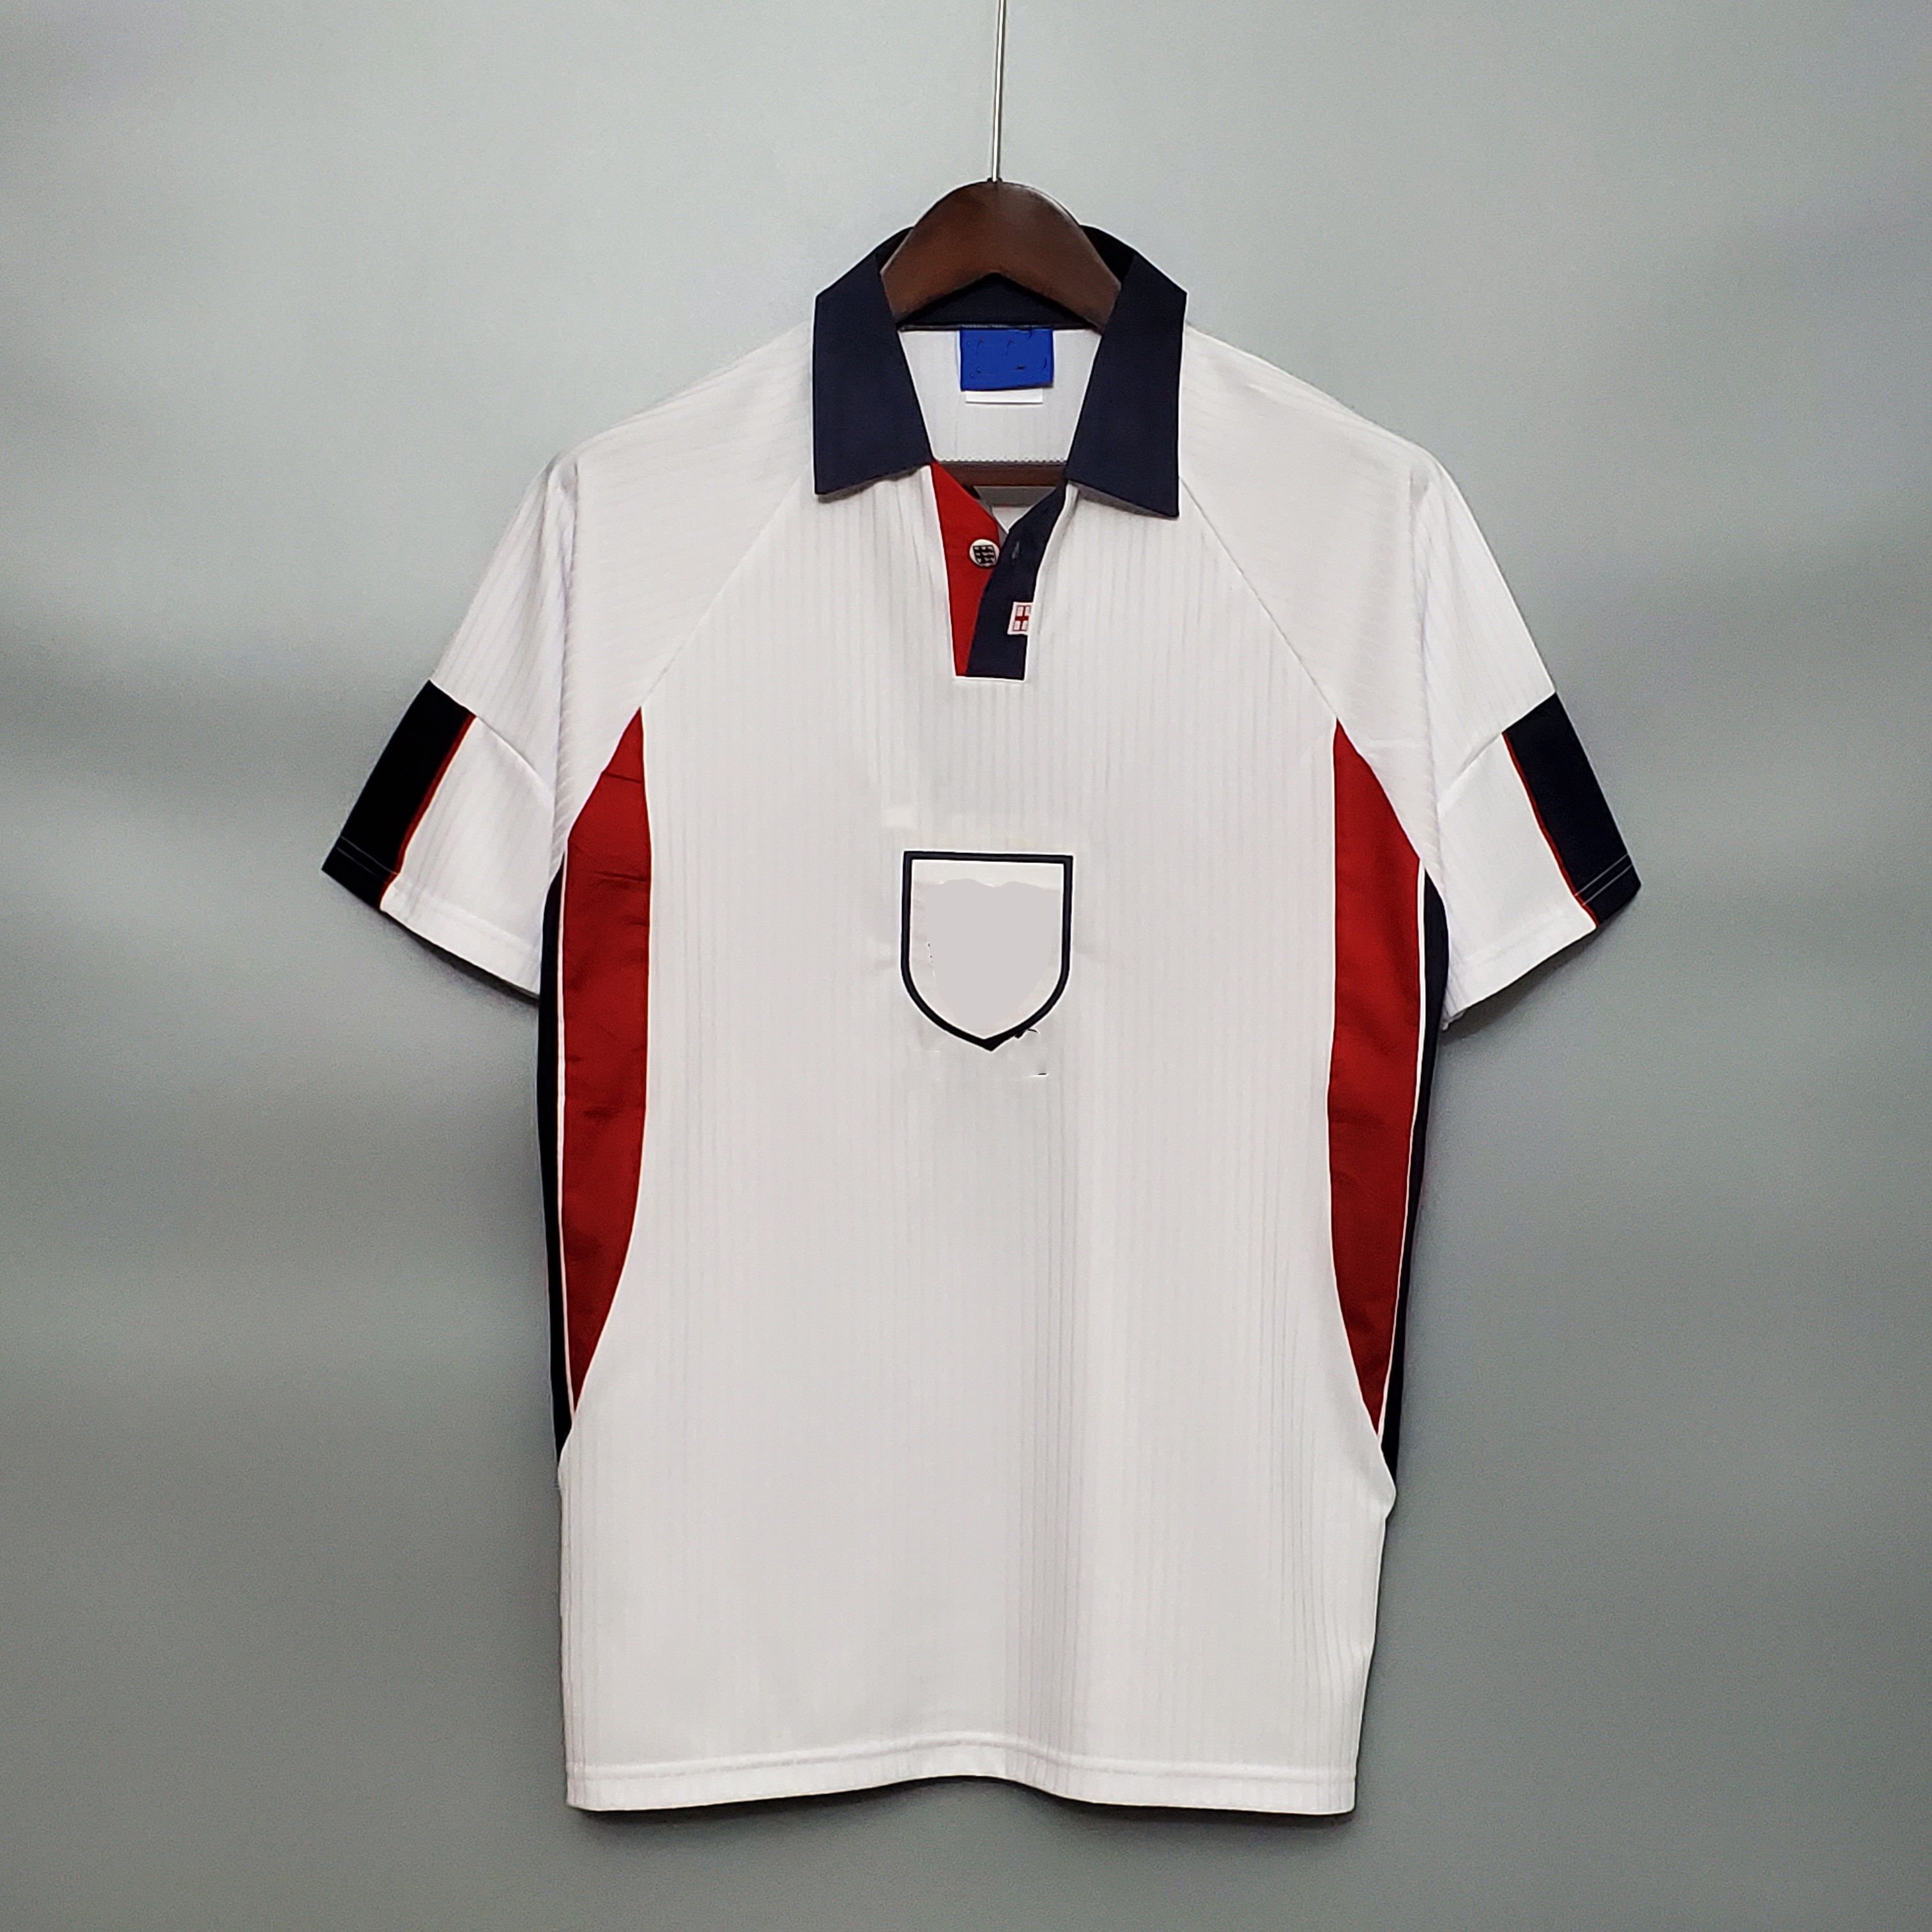 DHGate Player Shirts vs Fan Shirts - What is the Difference? Retro Remake Soccer  Jersey 